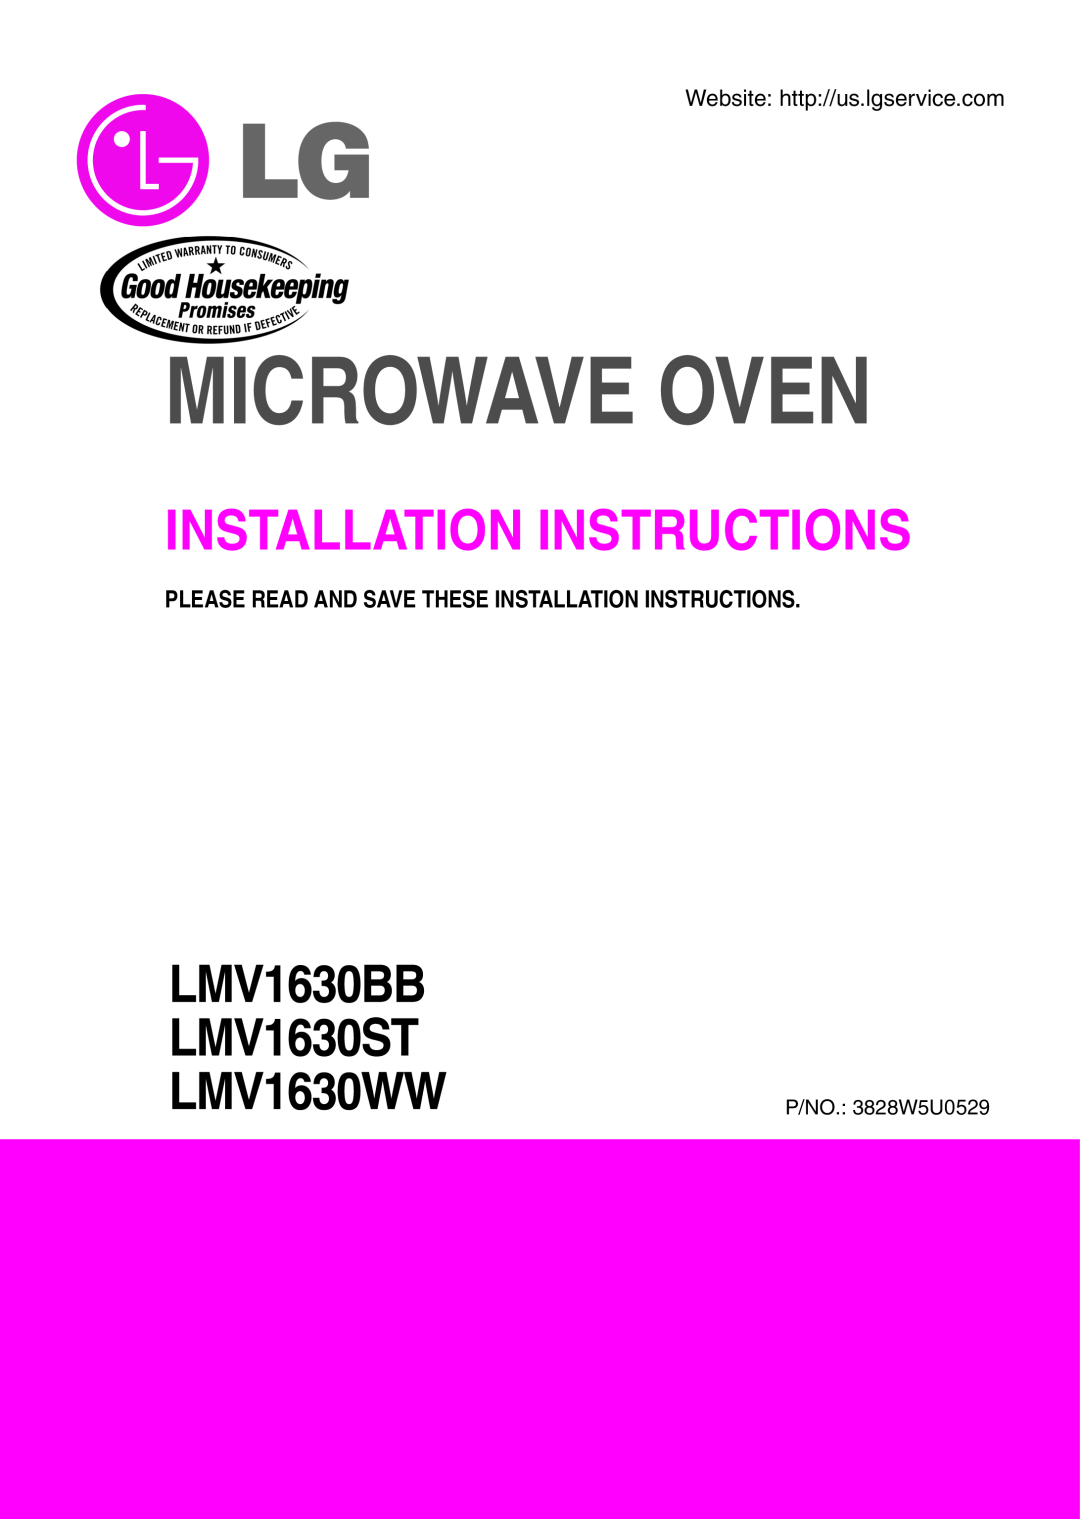 LG Electronics LMV1630BB installation instructions Please Read And Save These Installation Instructions, P/NO. 3828W5U0529 